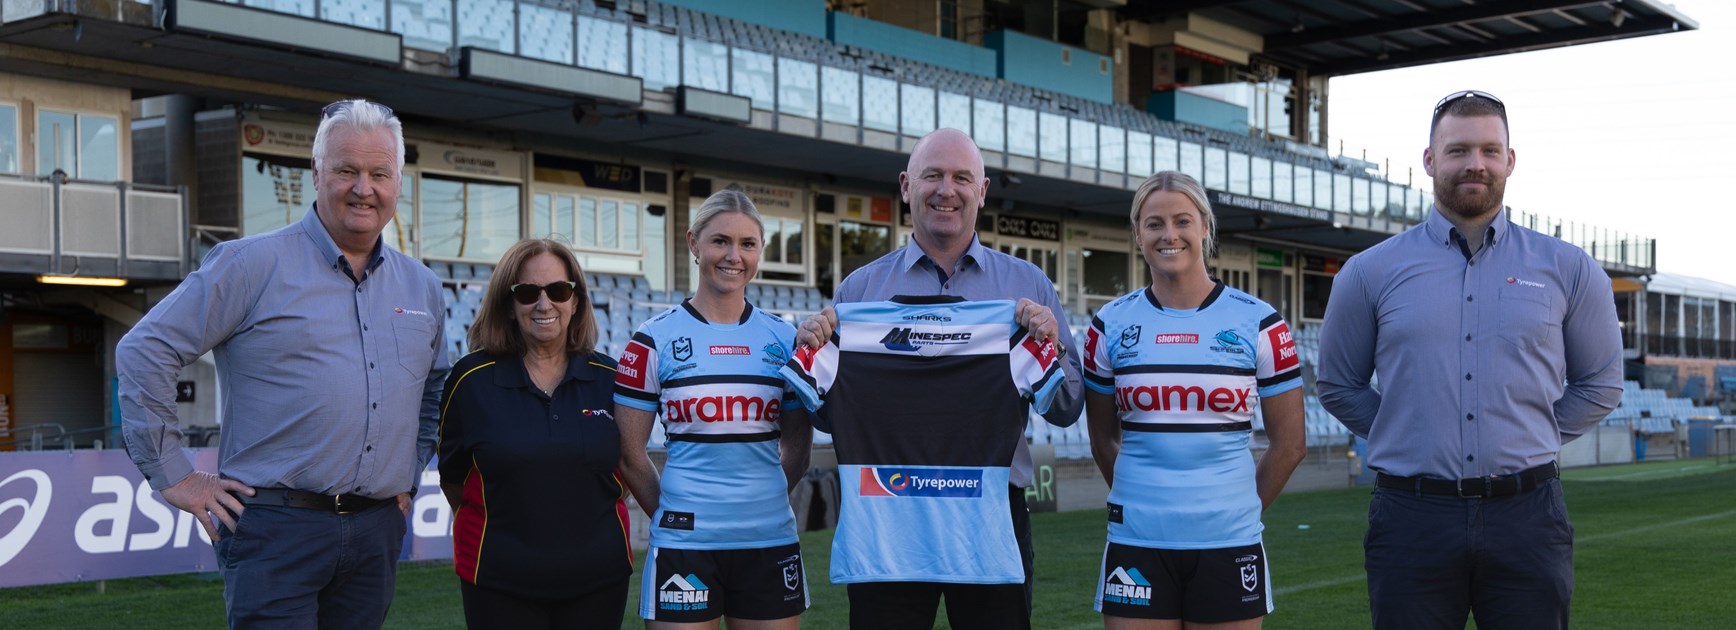 NRLW Sharks ‘powering’ with new partnership announcement